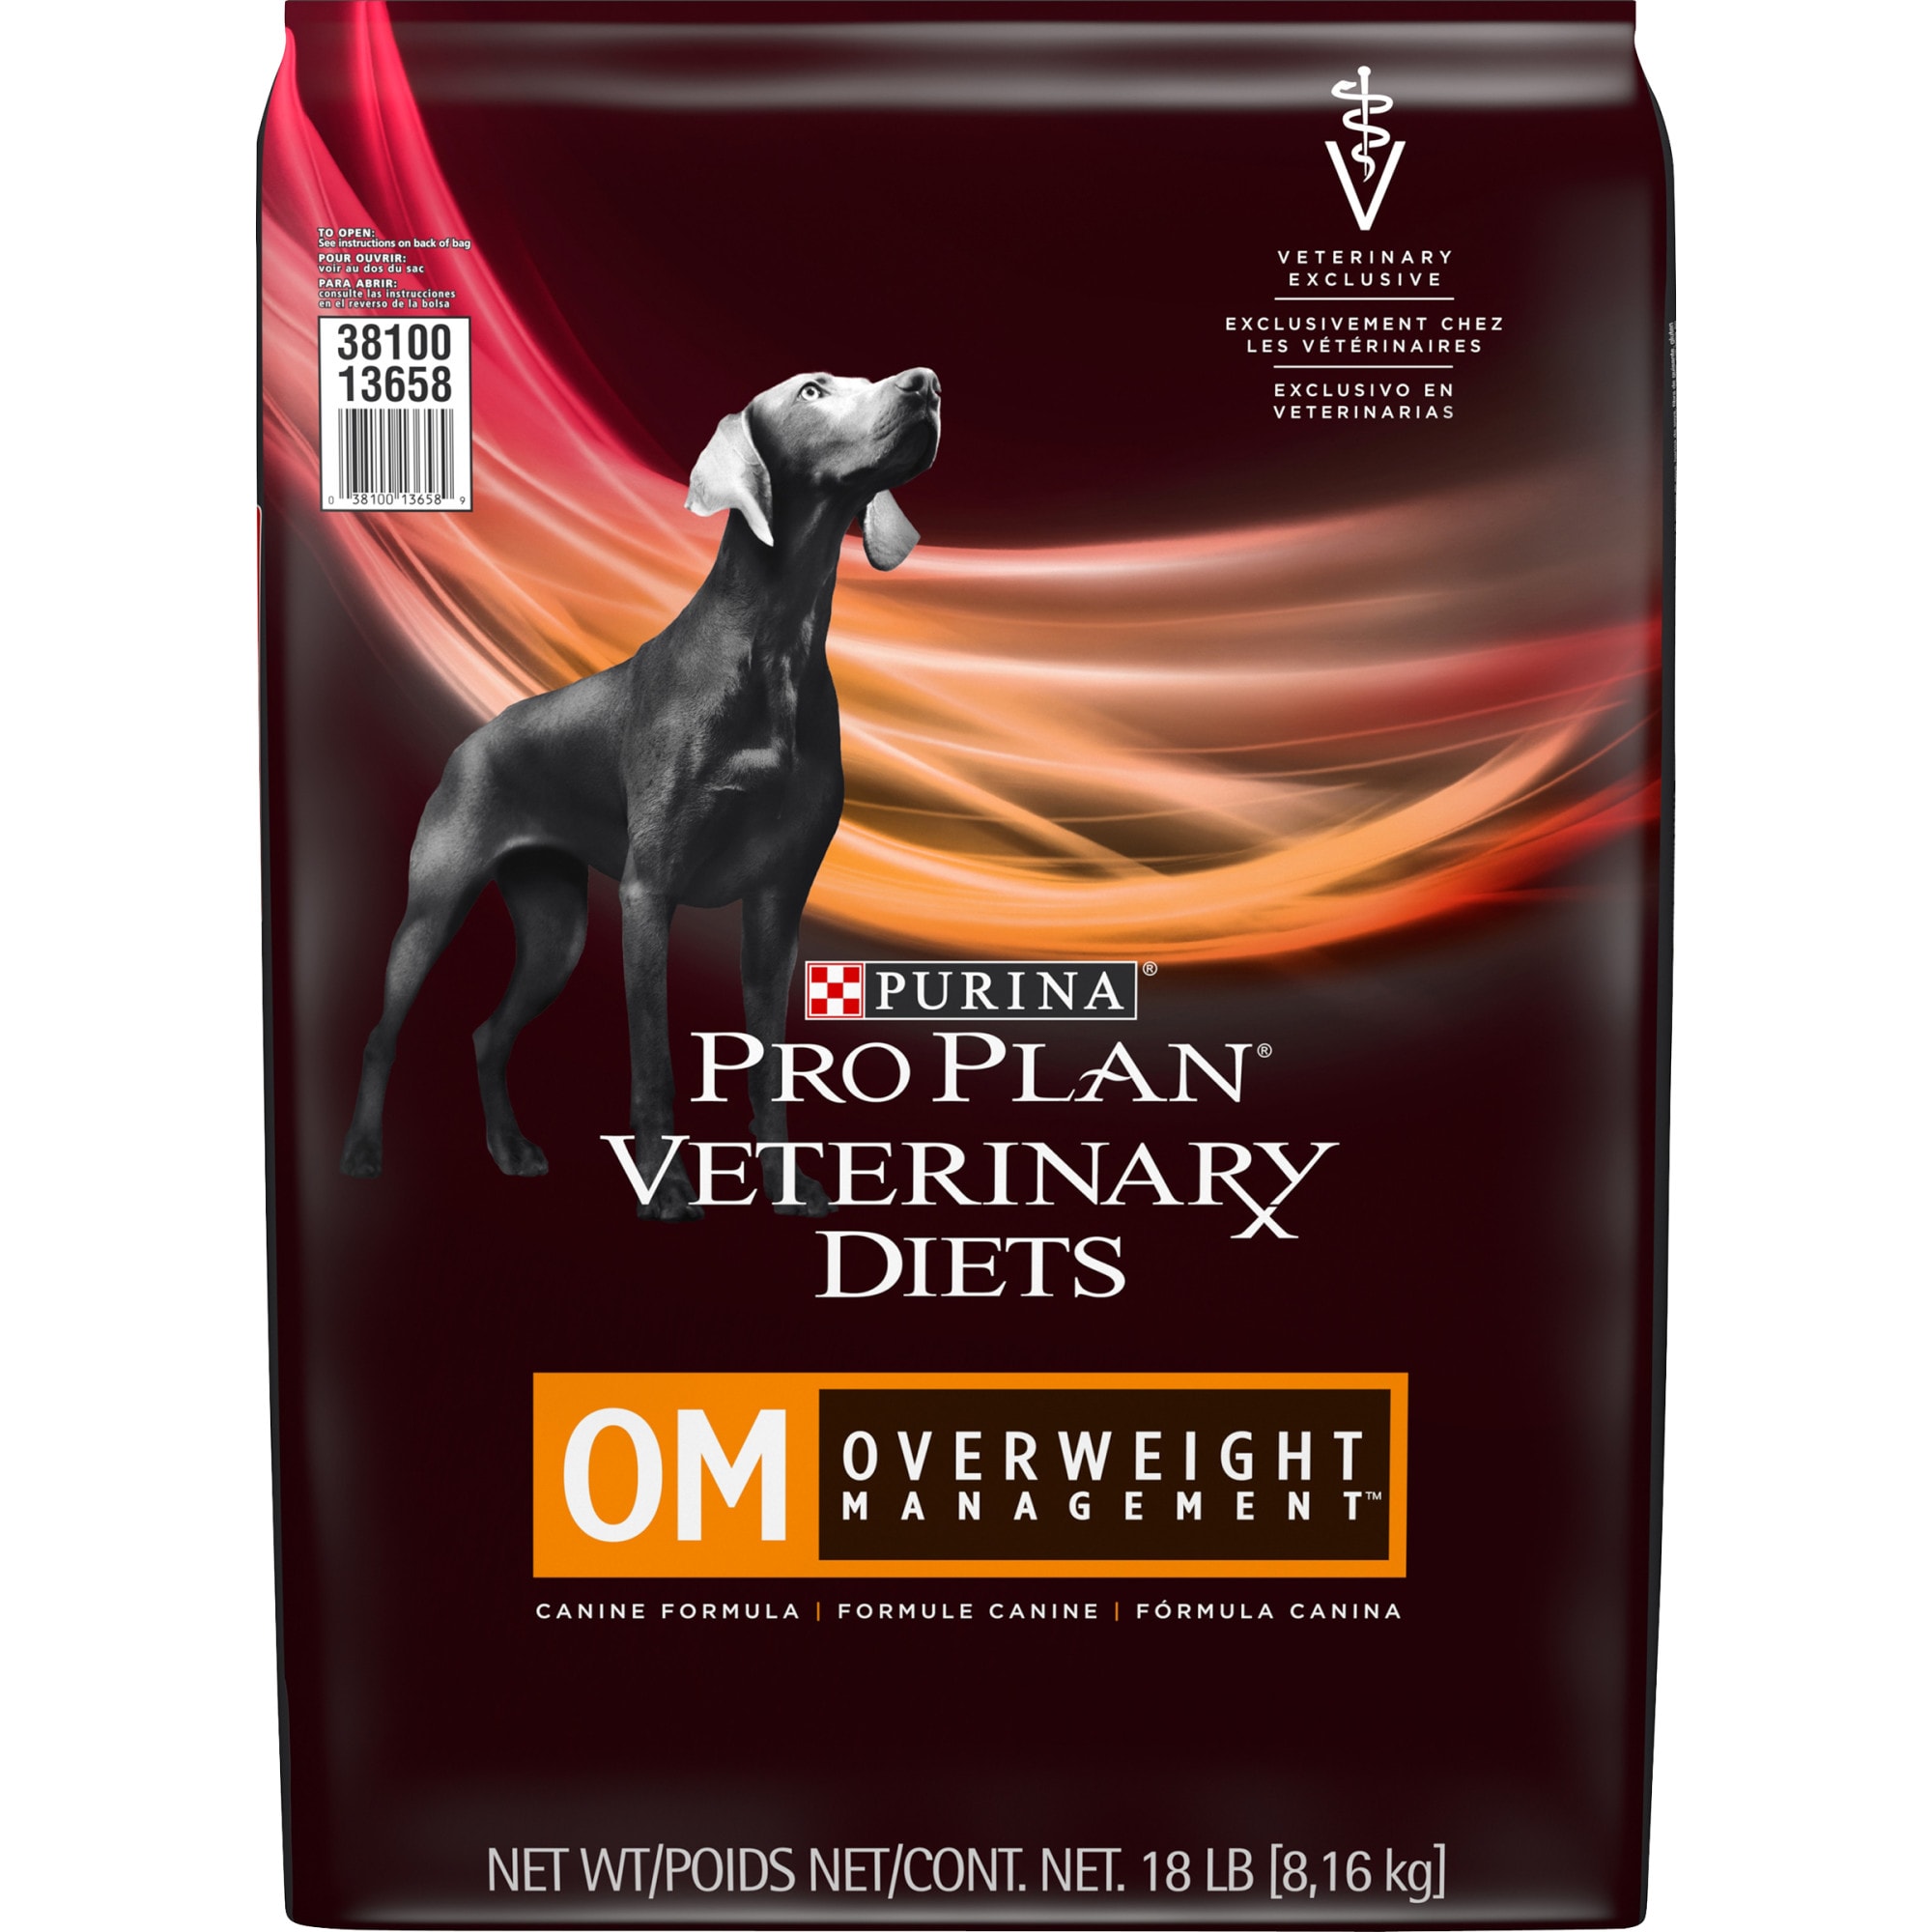 purina-pro-plan-veterinary-diets-om-overweight-management-canine